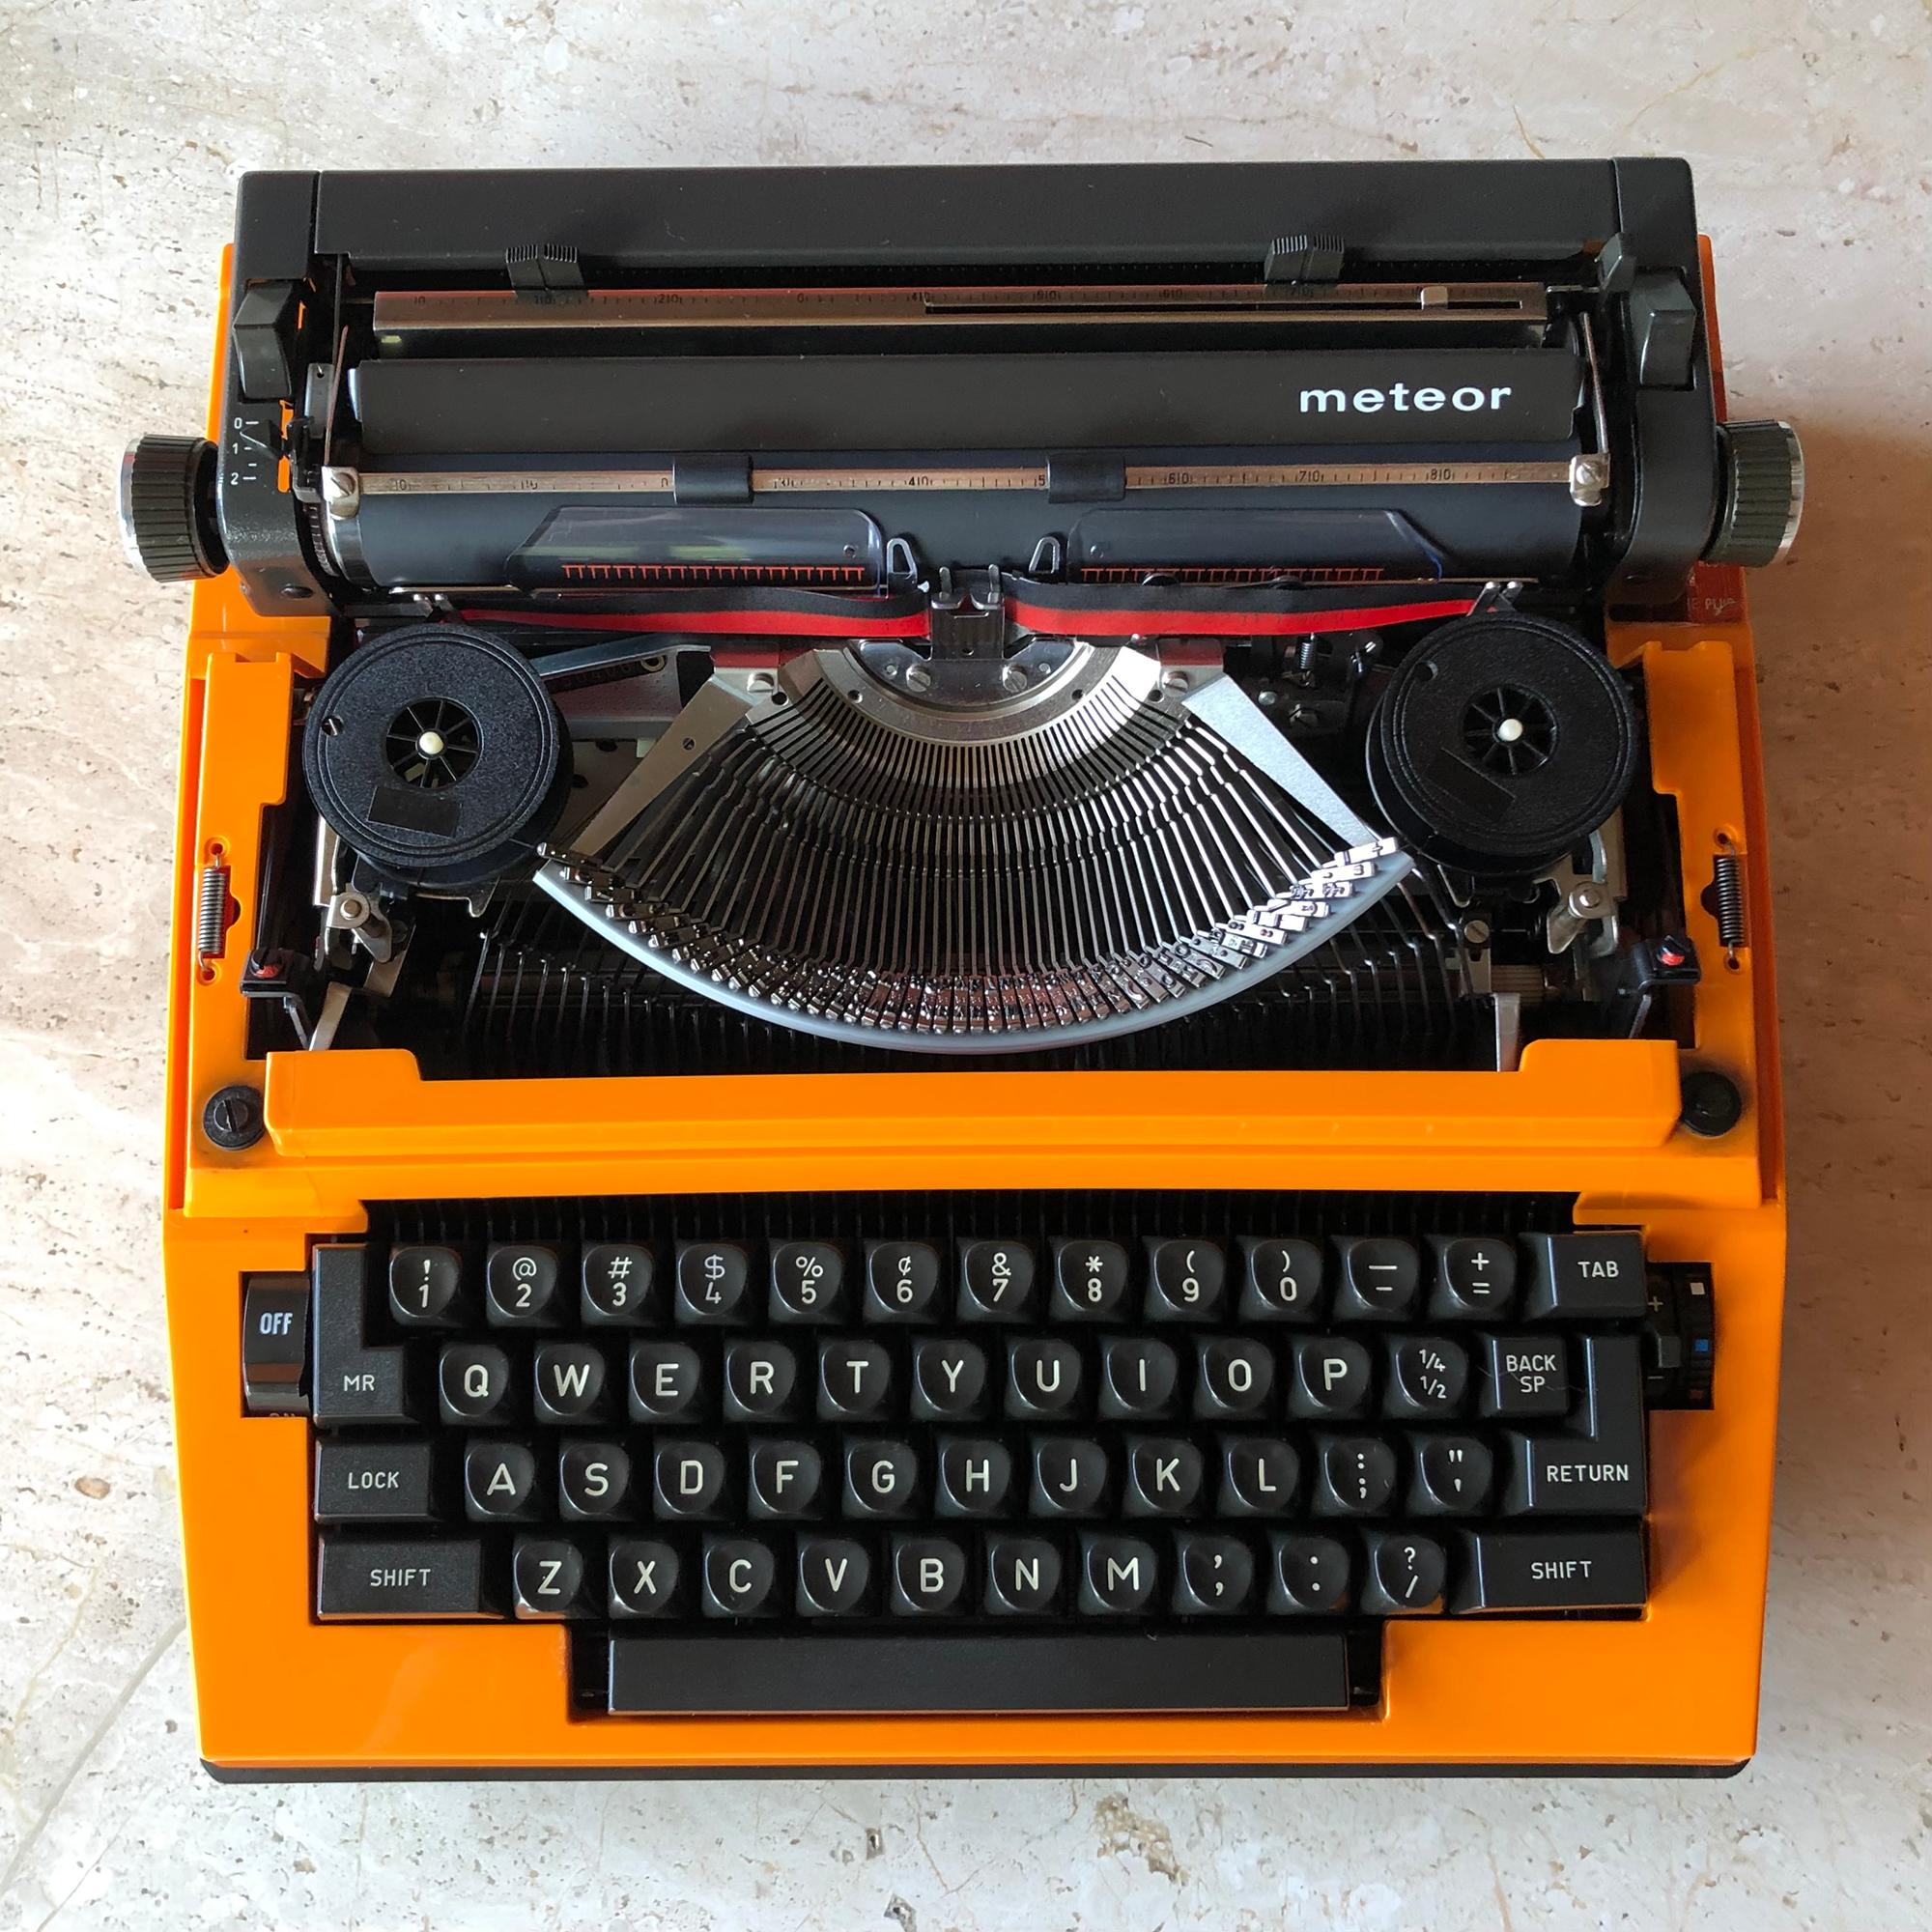 Vintage Adler Meteor electric typewriter with original case and cord. Made in Germany. Total overall measurement is 13.5